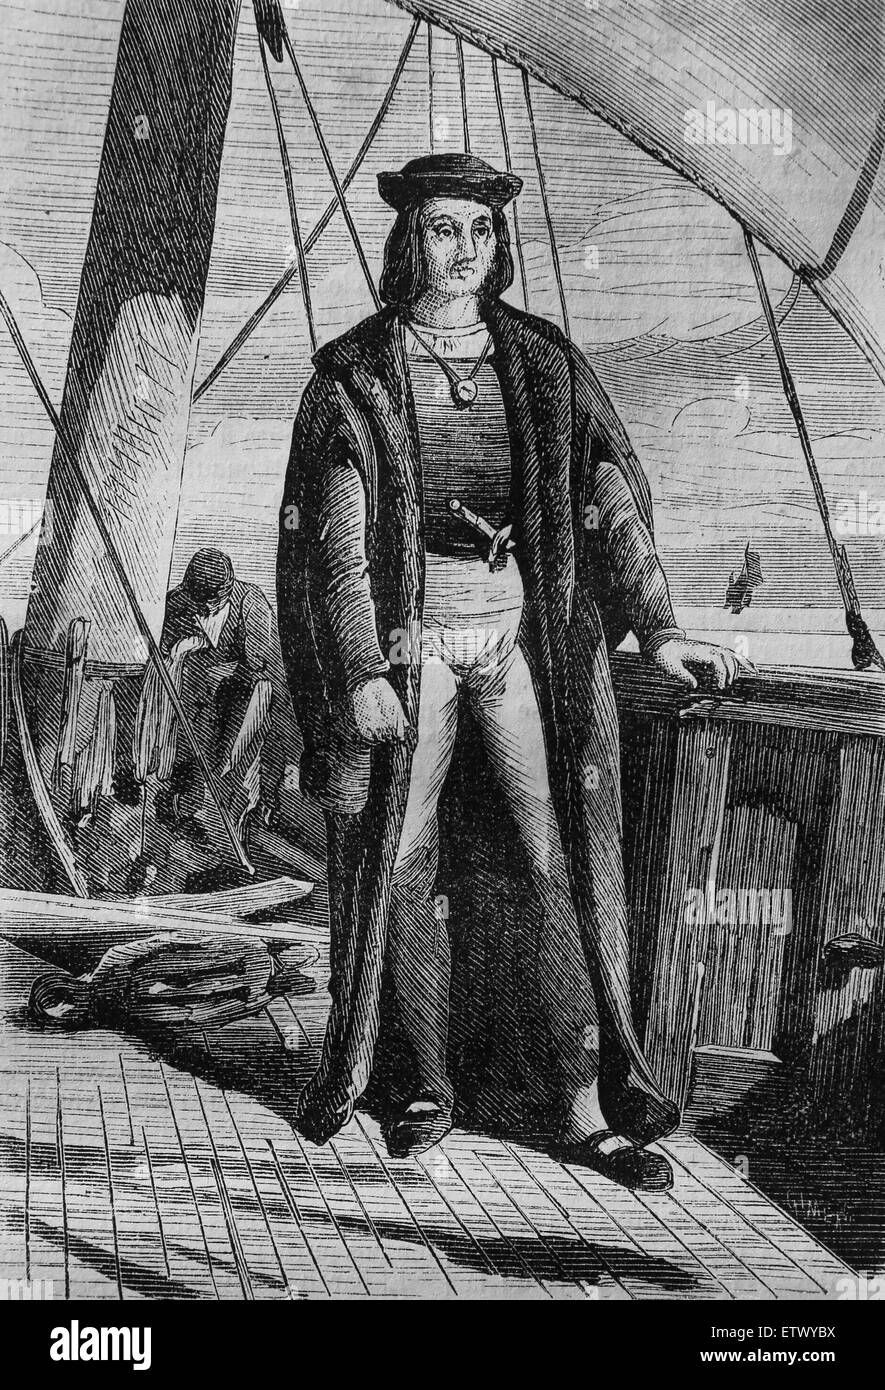 Christopher Columbus (1450-1506). Explorer, navigation and colonizer. Discoverer of the New World. Engraving. 19th century. Stock Photo